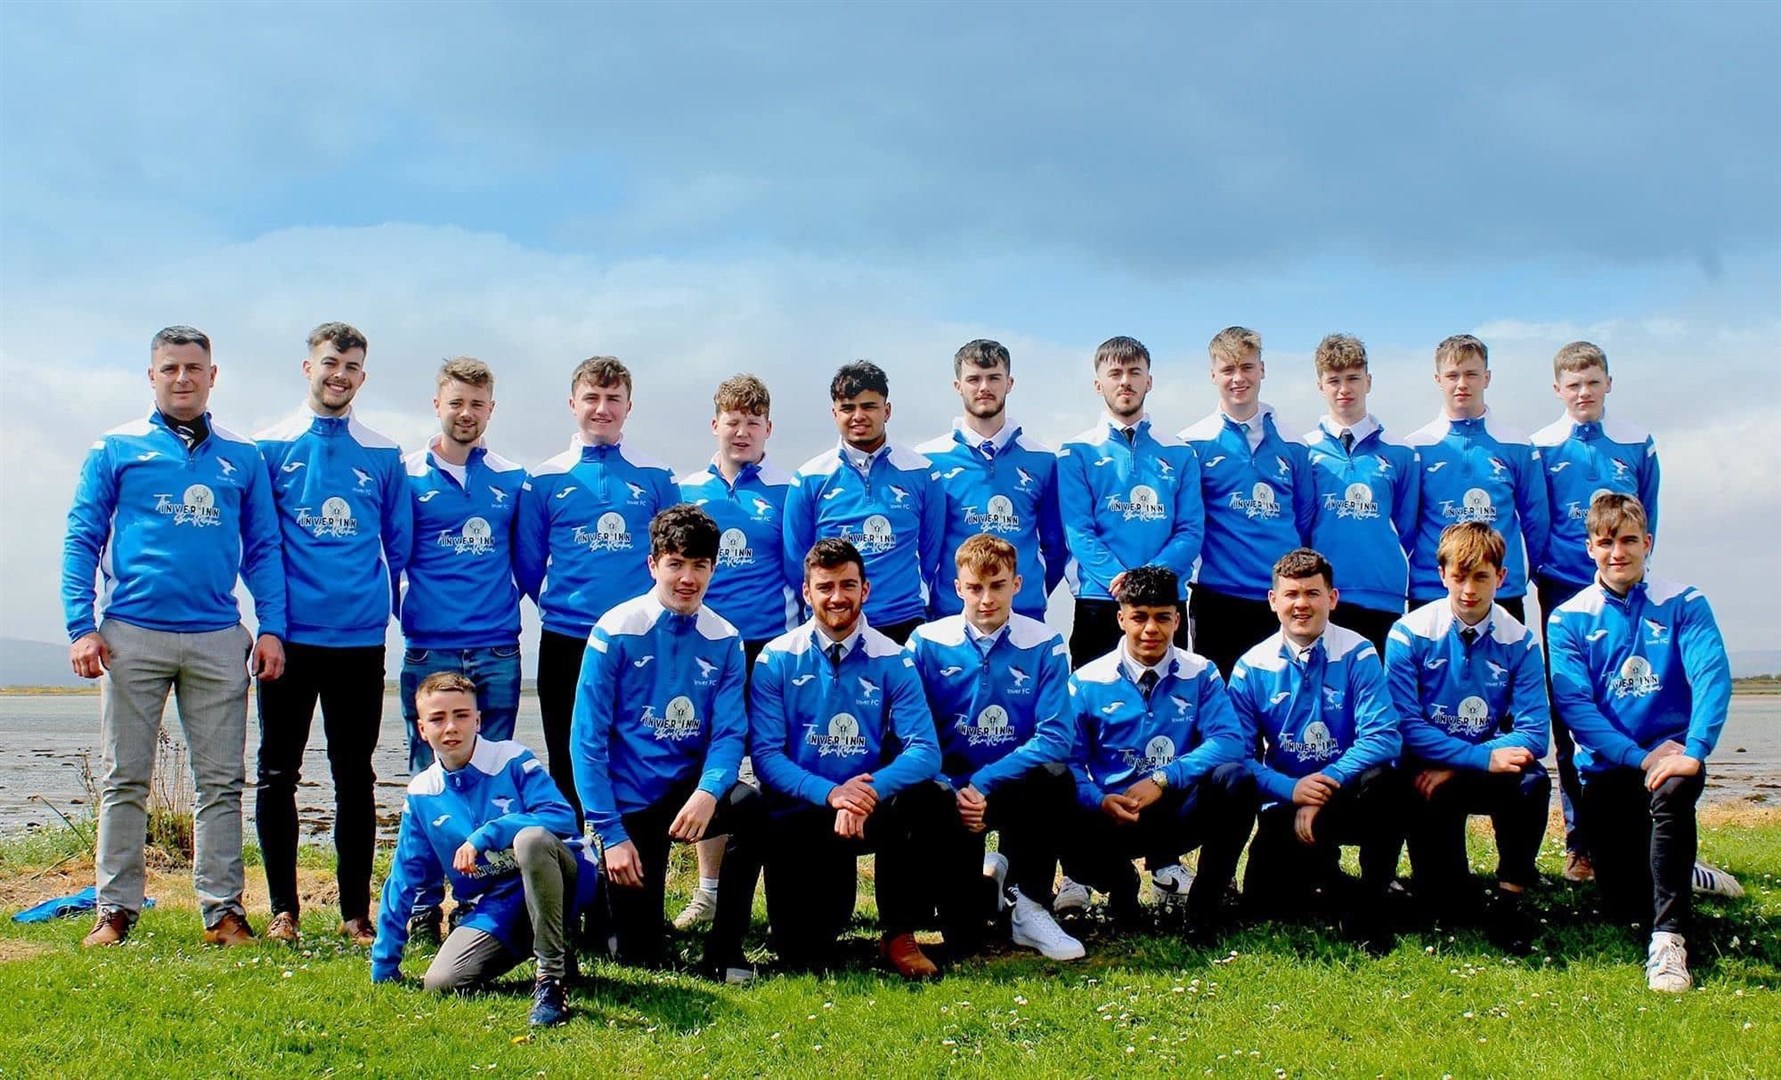 Paul Connelly's young Inver side are hopeful of making an impression in this year's amateur season.